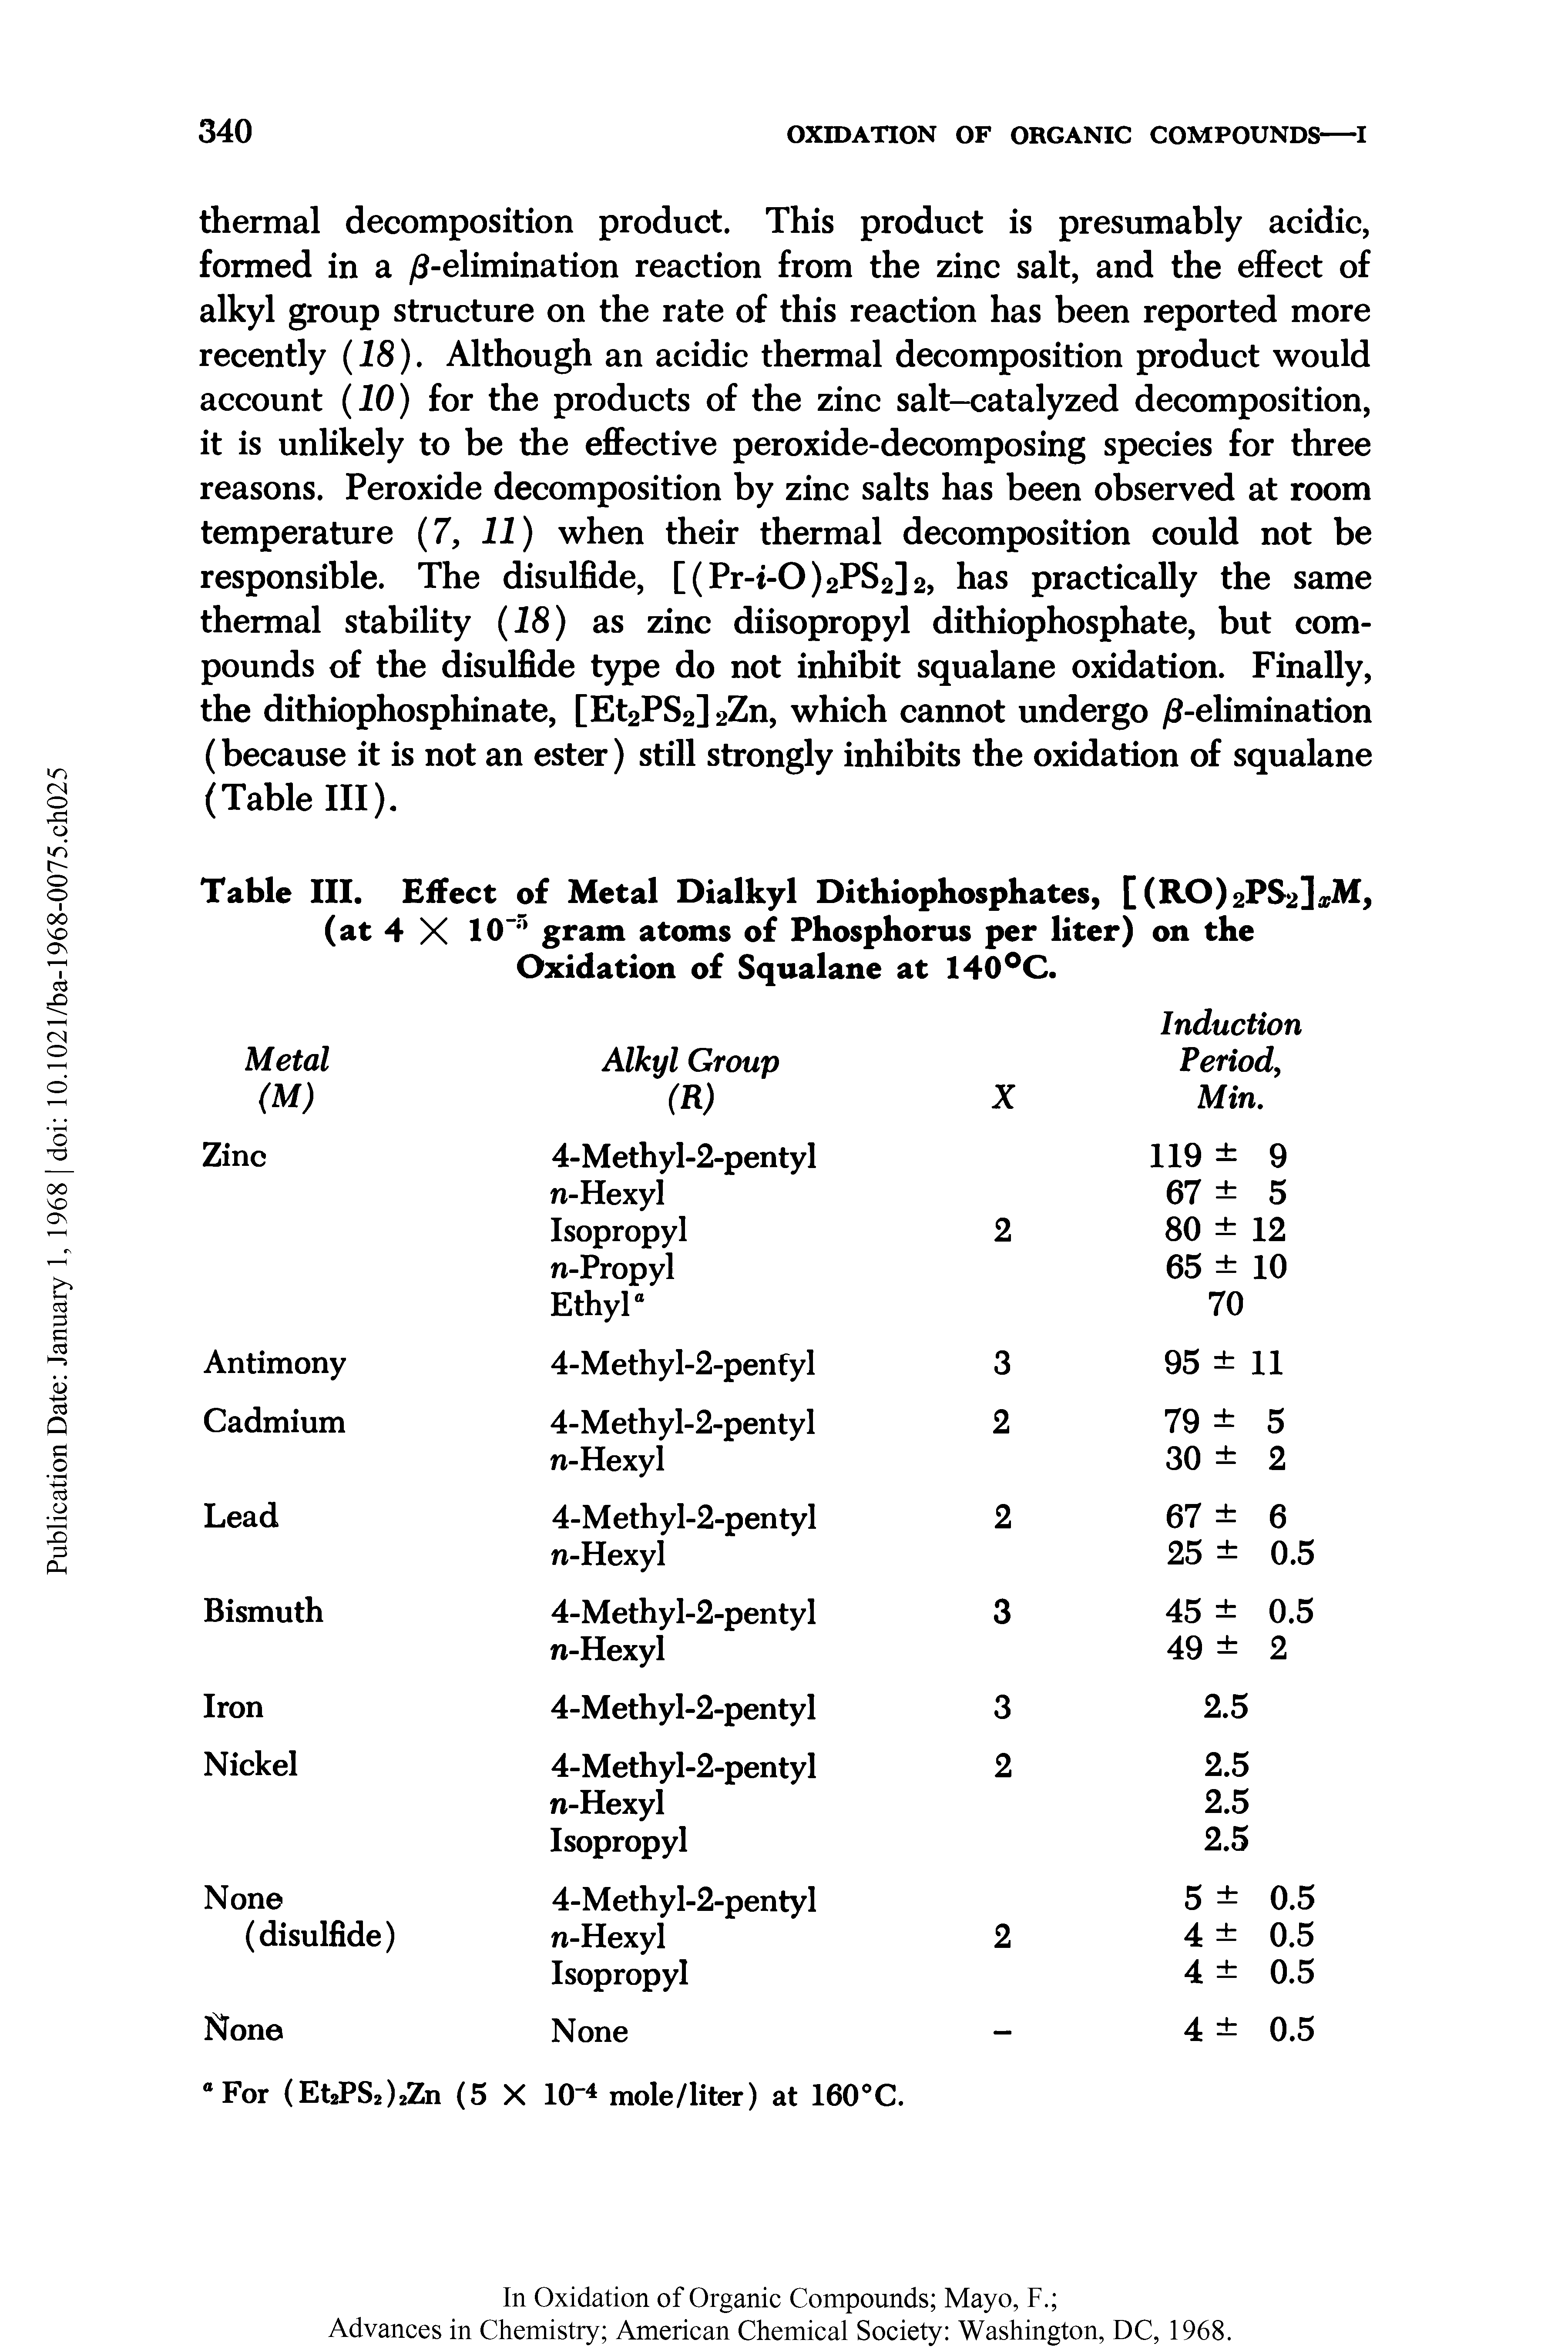 Table III. Effect of Metal Dialkyl Dithiophosphates, [ (RO)2PS2]a.M, (at 4 X 10 n gram atoms of Phosphorus per liter) on the Oxidation of Squalane at 140°C.